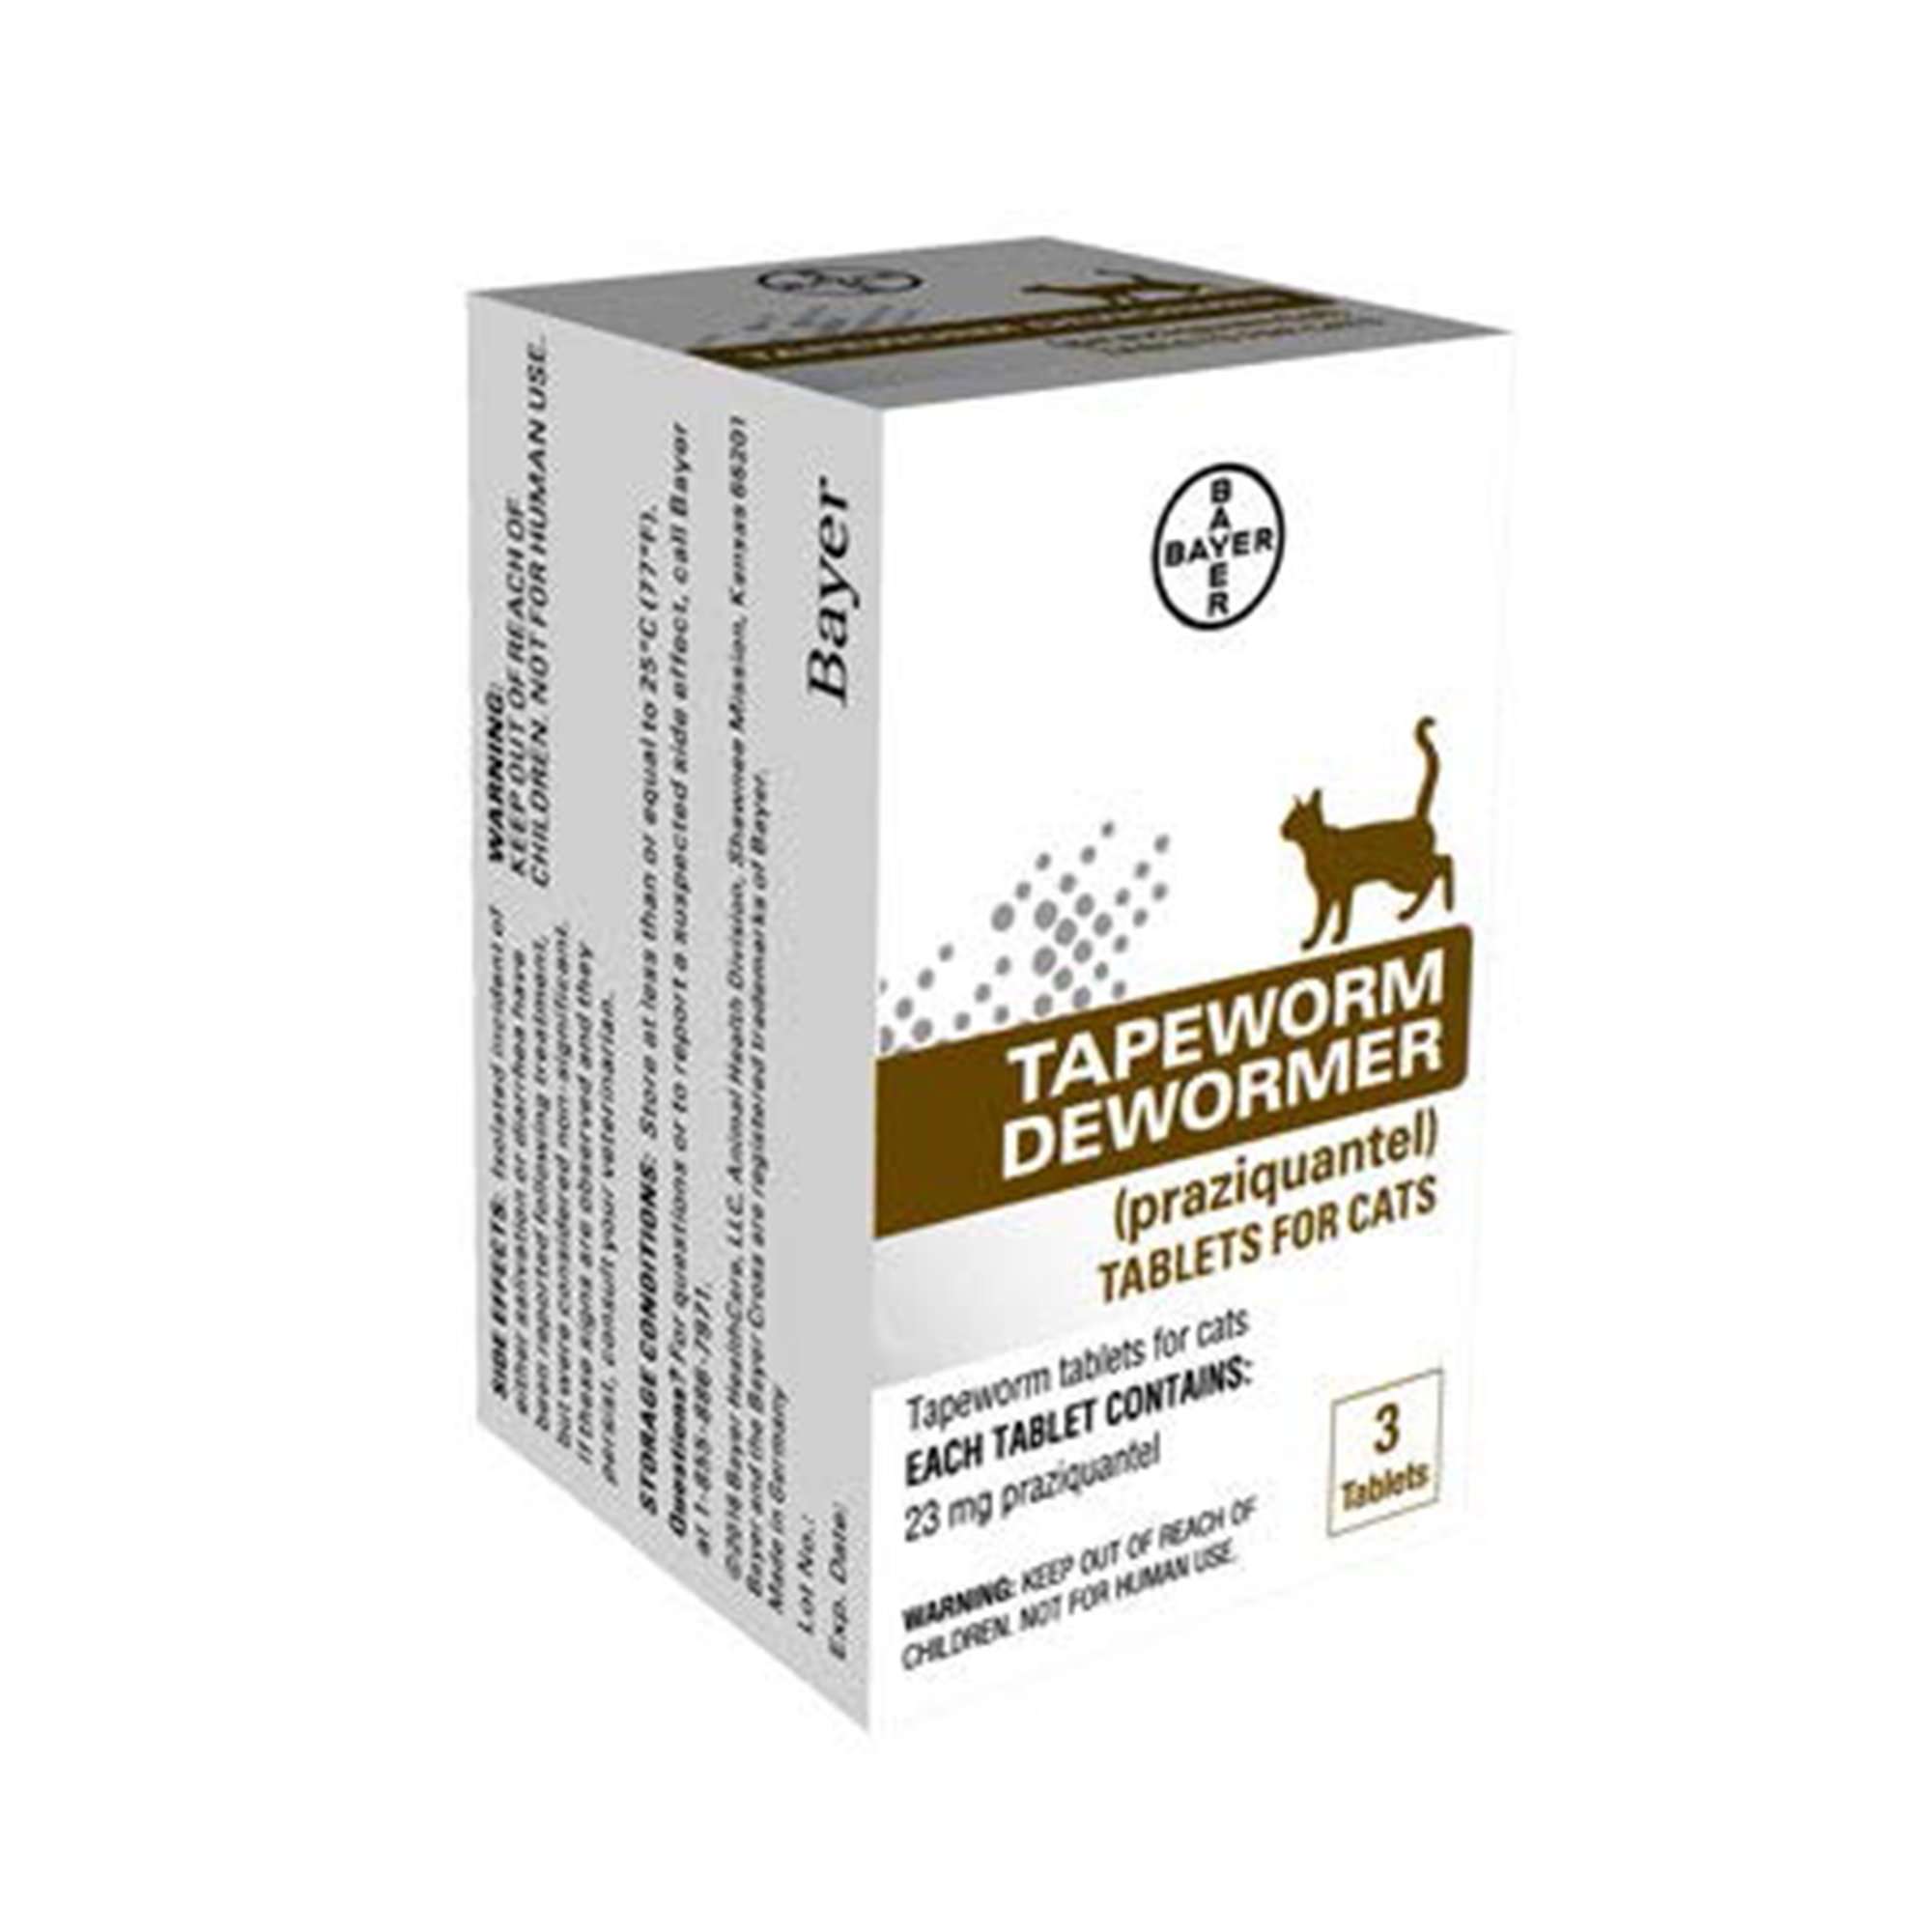 Bayer Tapeworm Dewormer Tablets for Cats